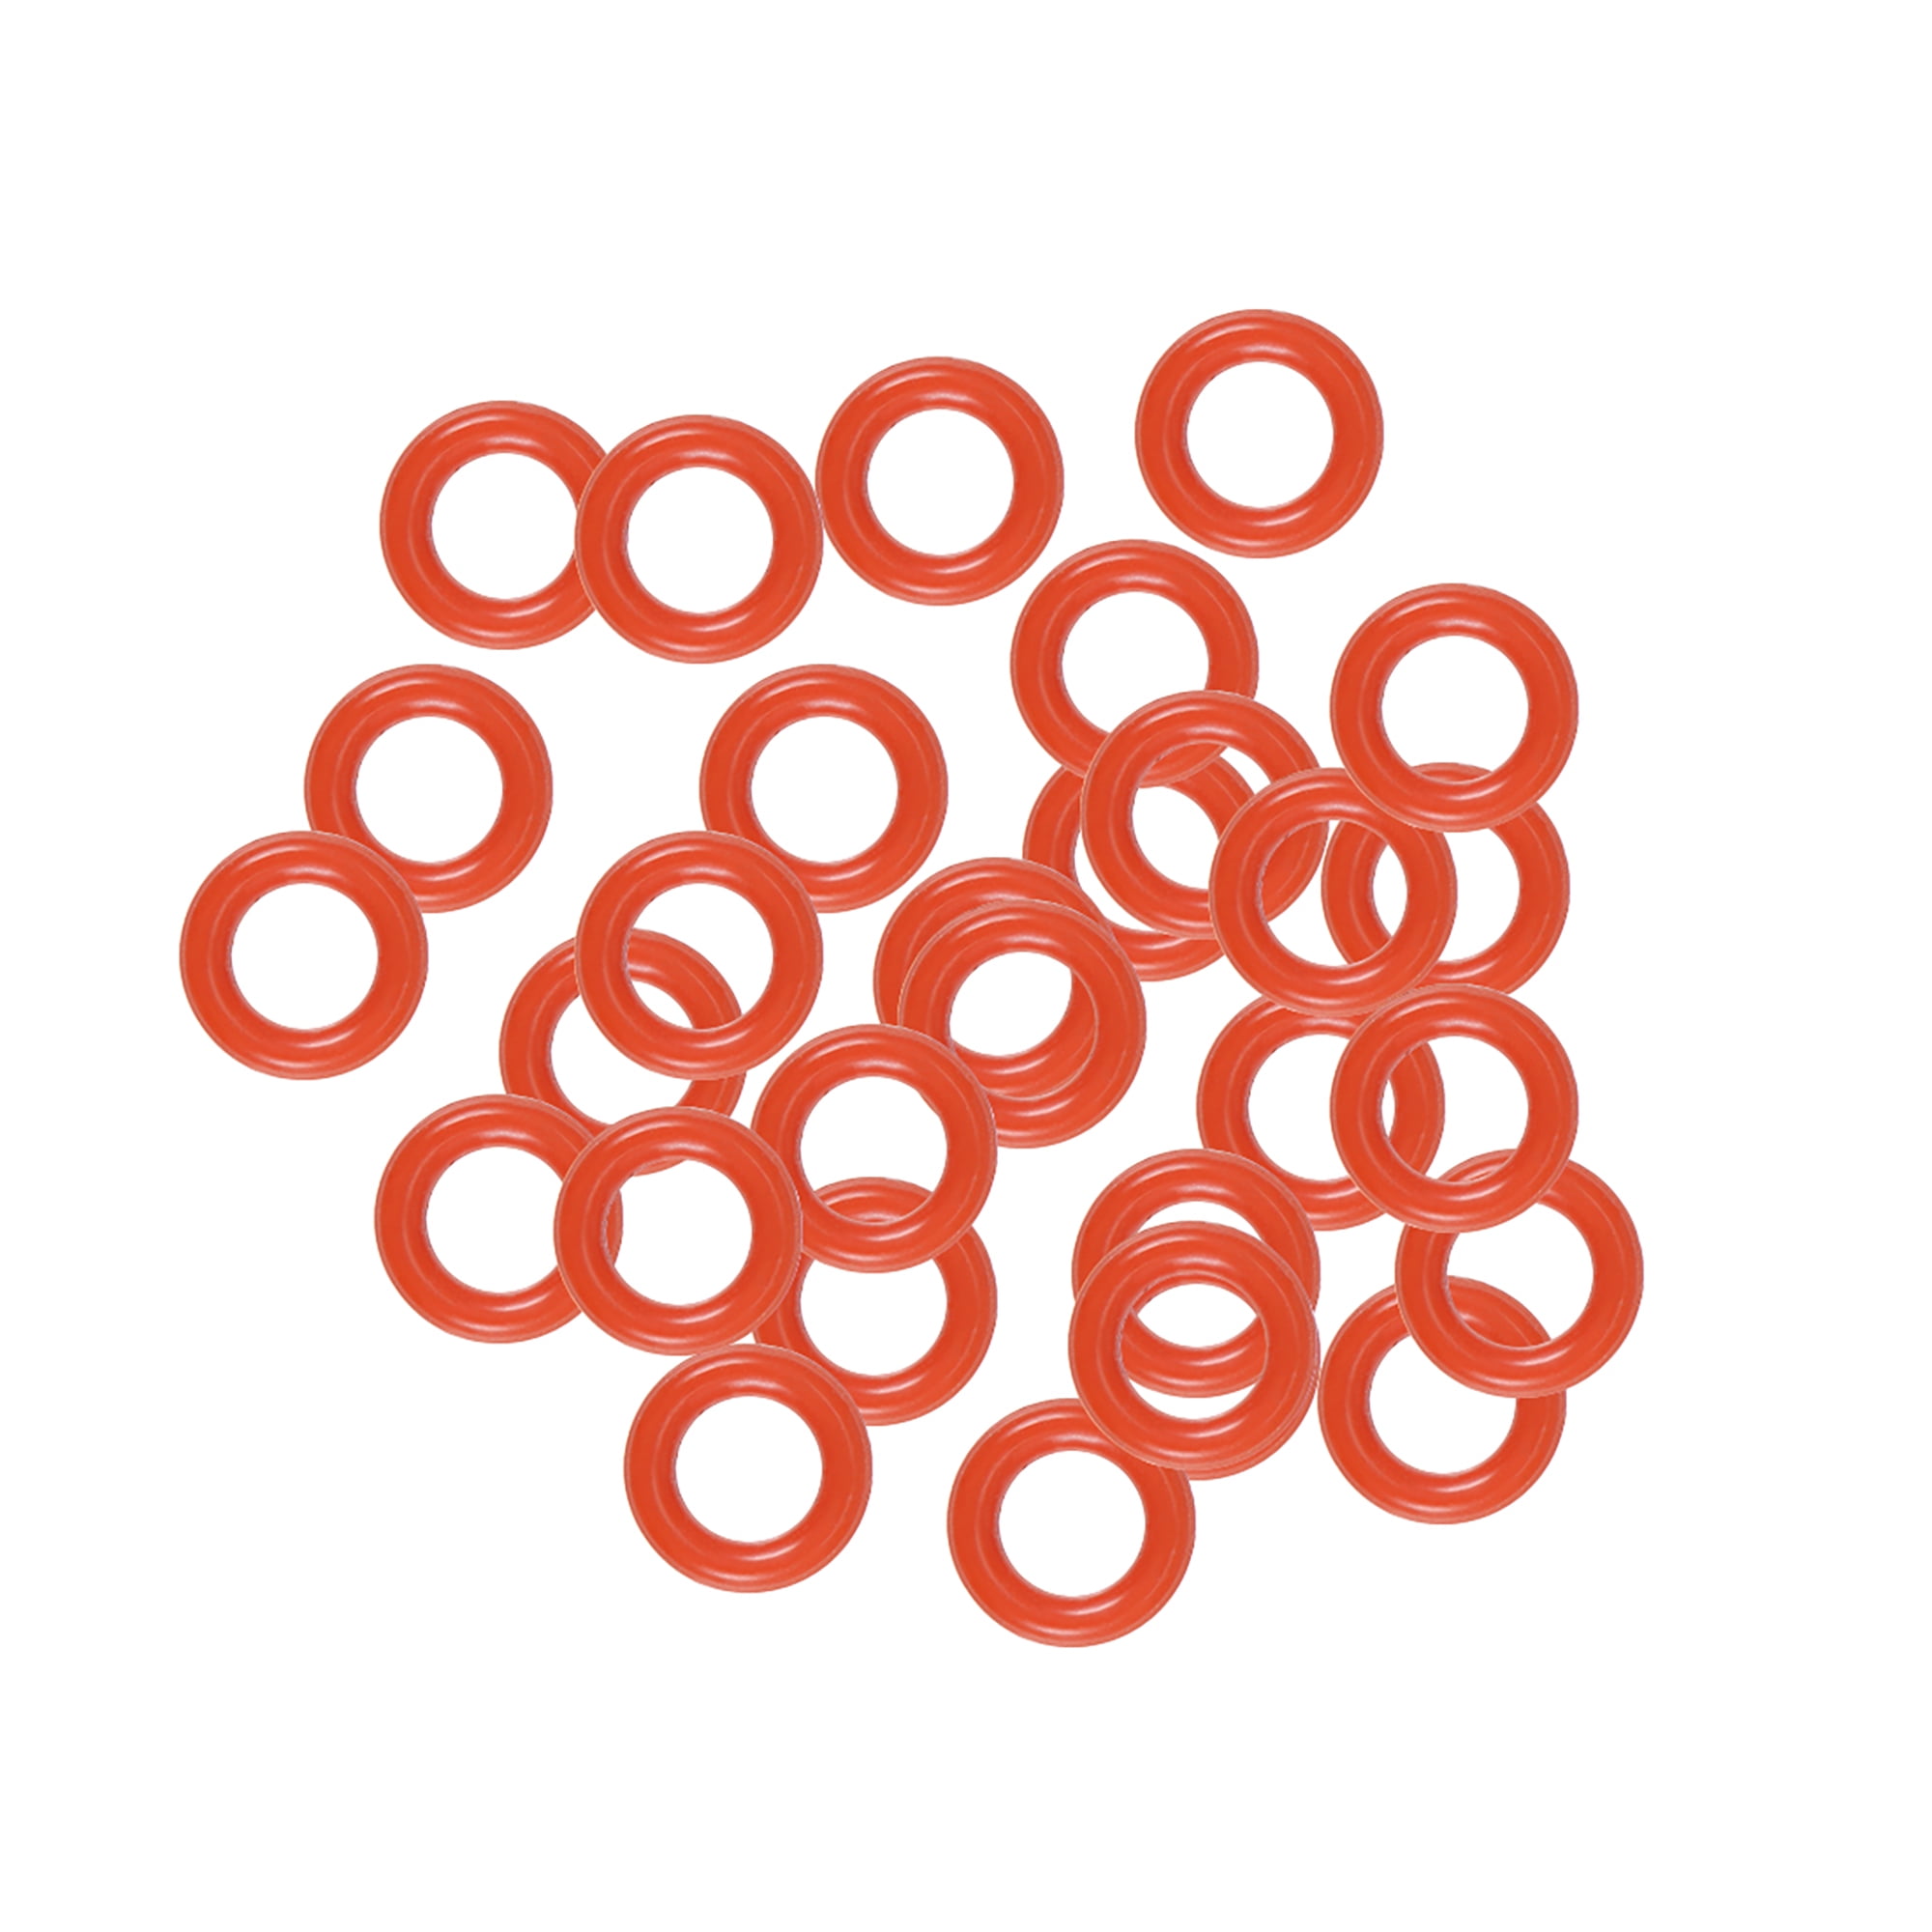 14 /15 /16 /18 /20mm Outer Diameter 1mm Thickness Red Silicone O Ring Seal 20pcs 